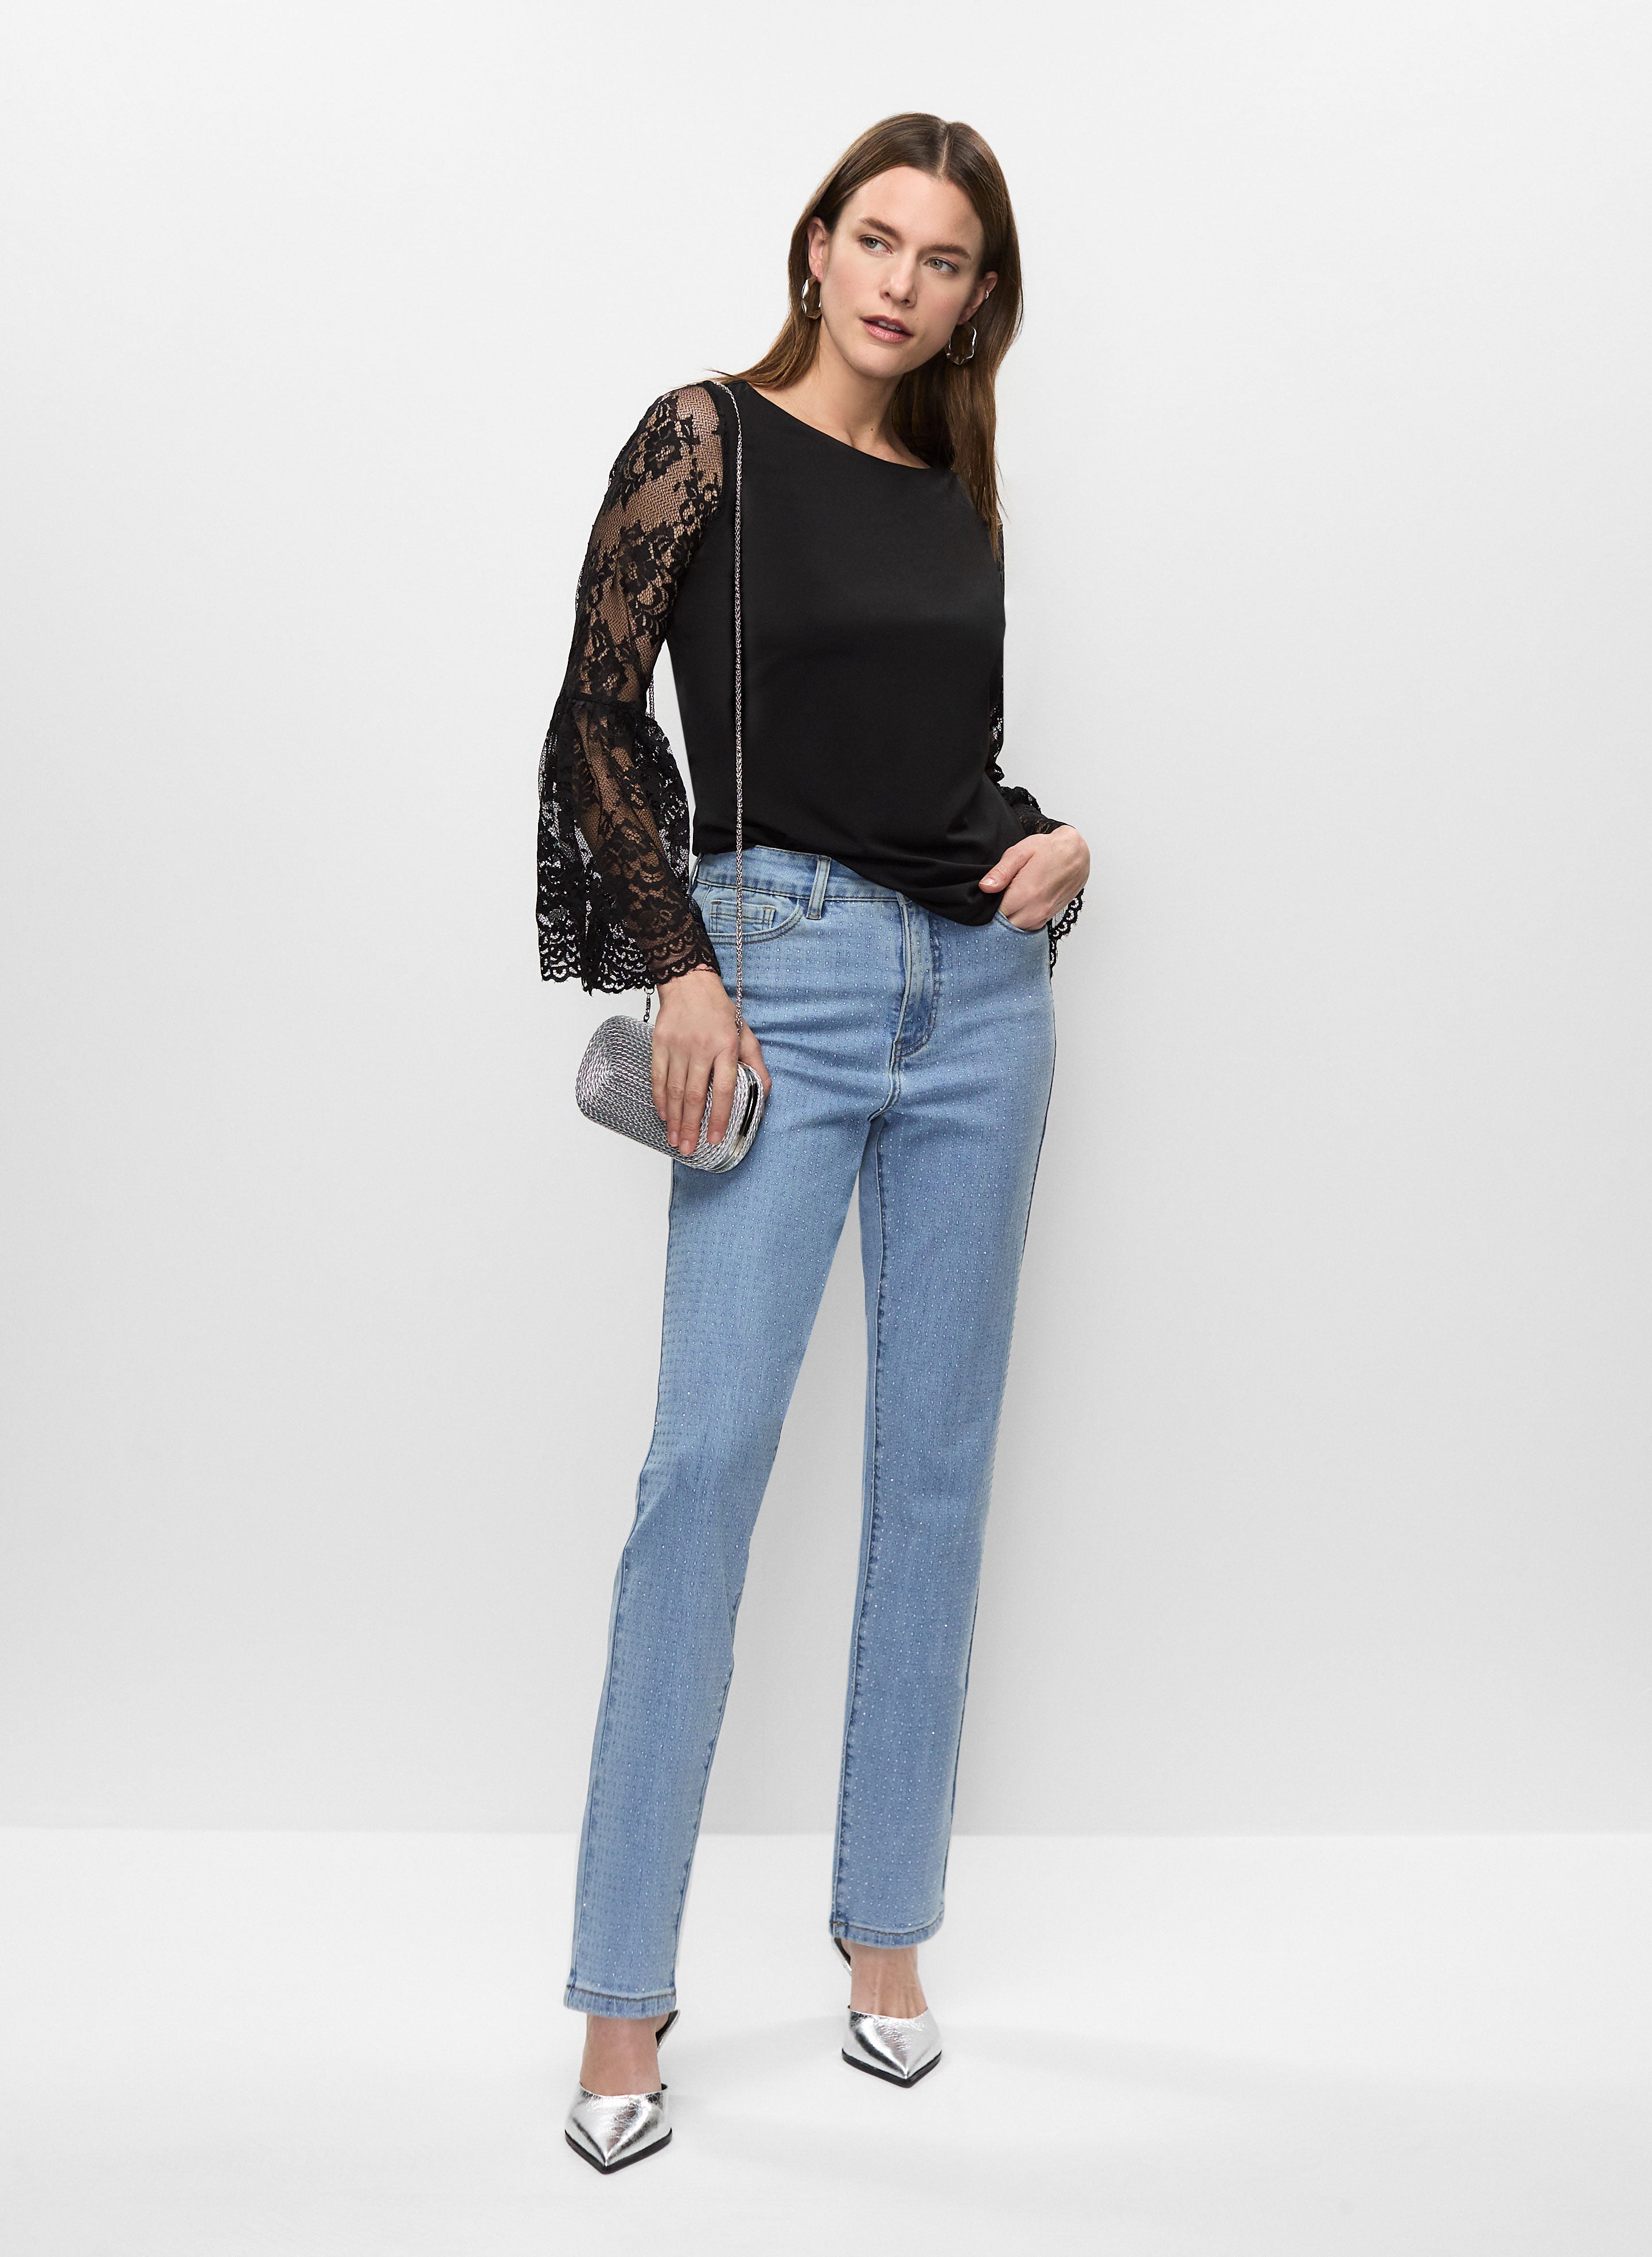 Lace Sleeve Top & Embellished Jeans